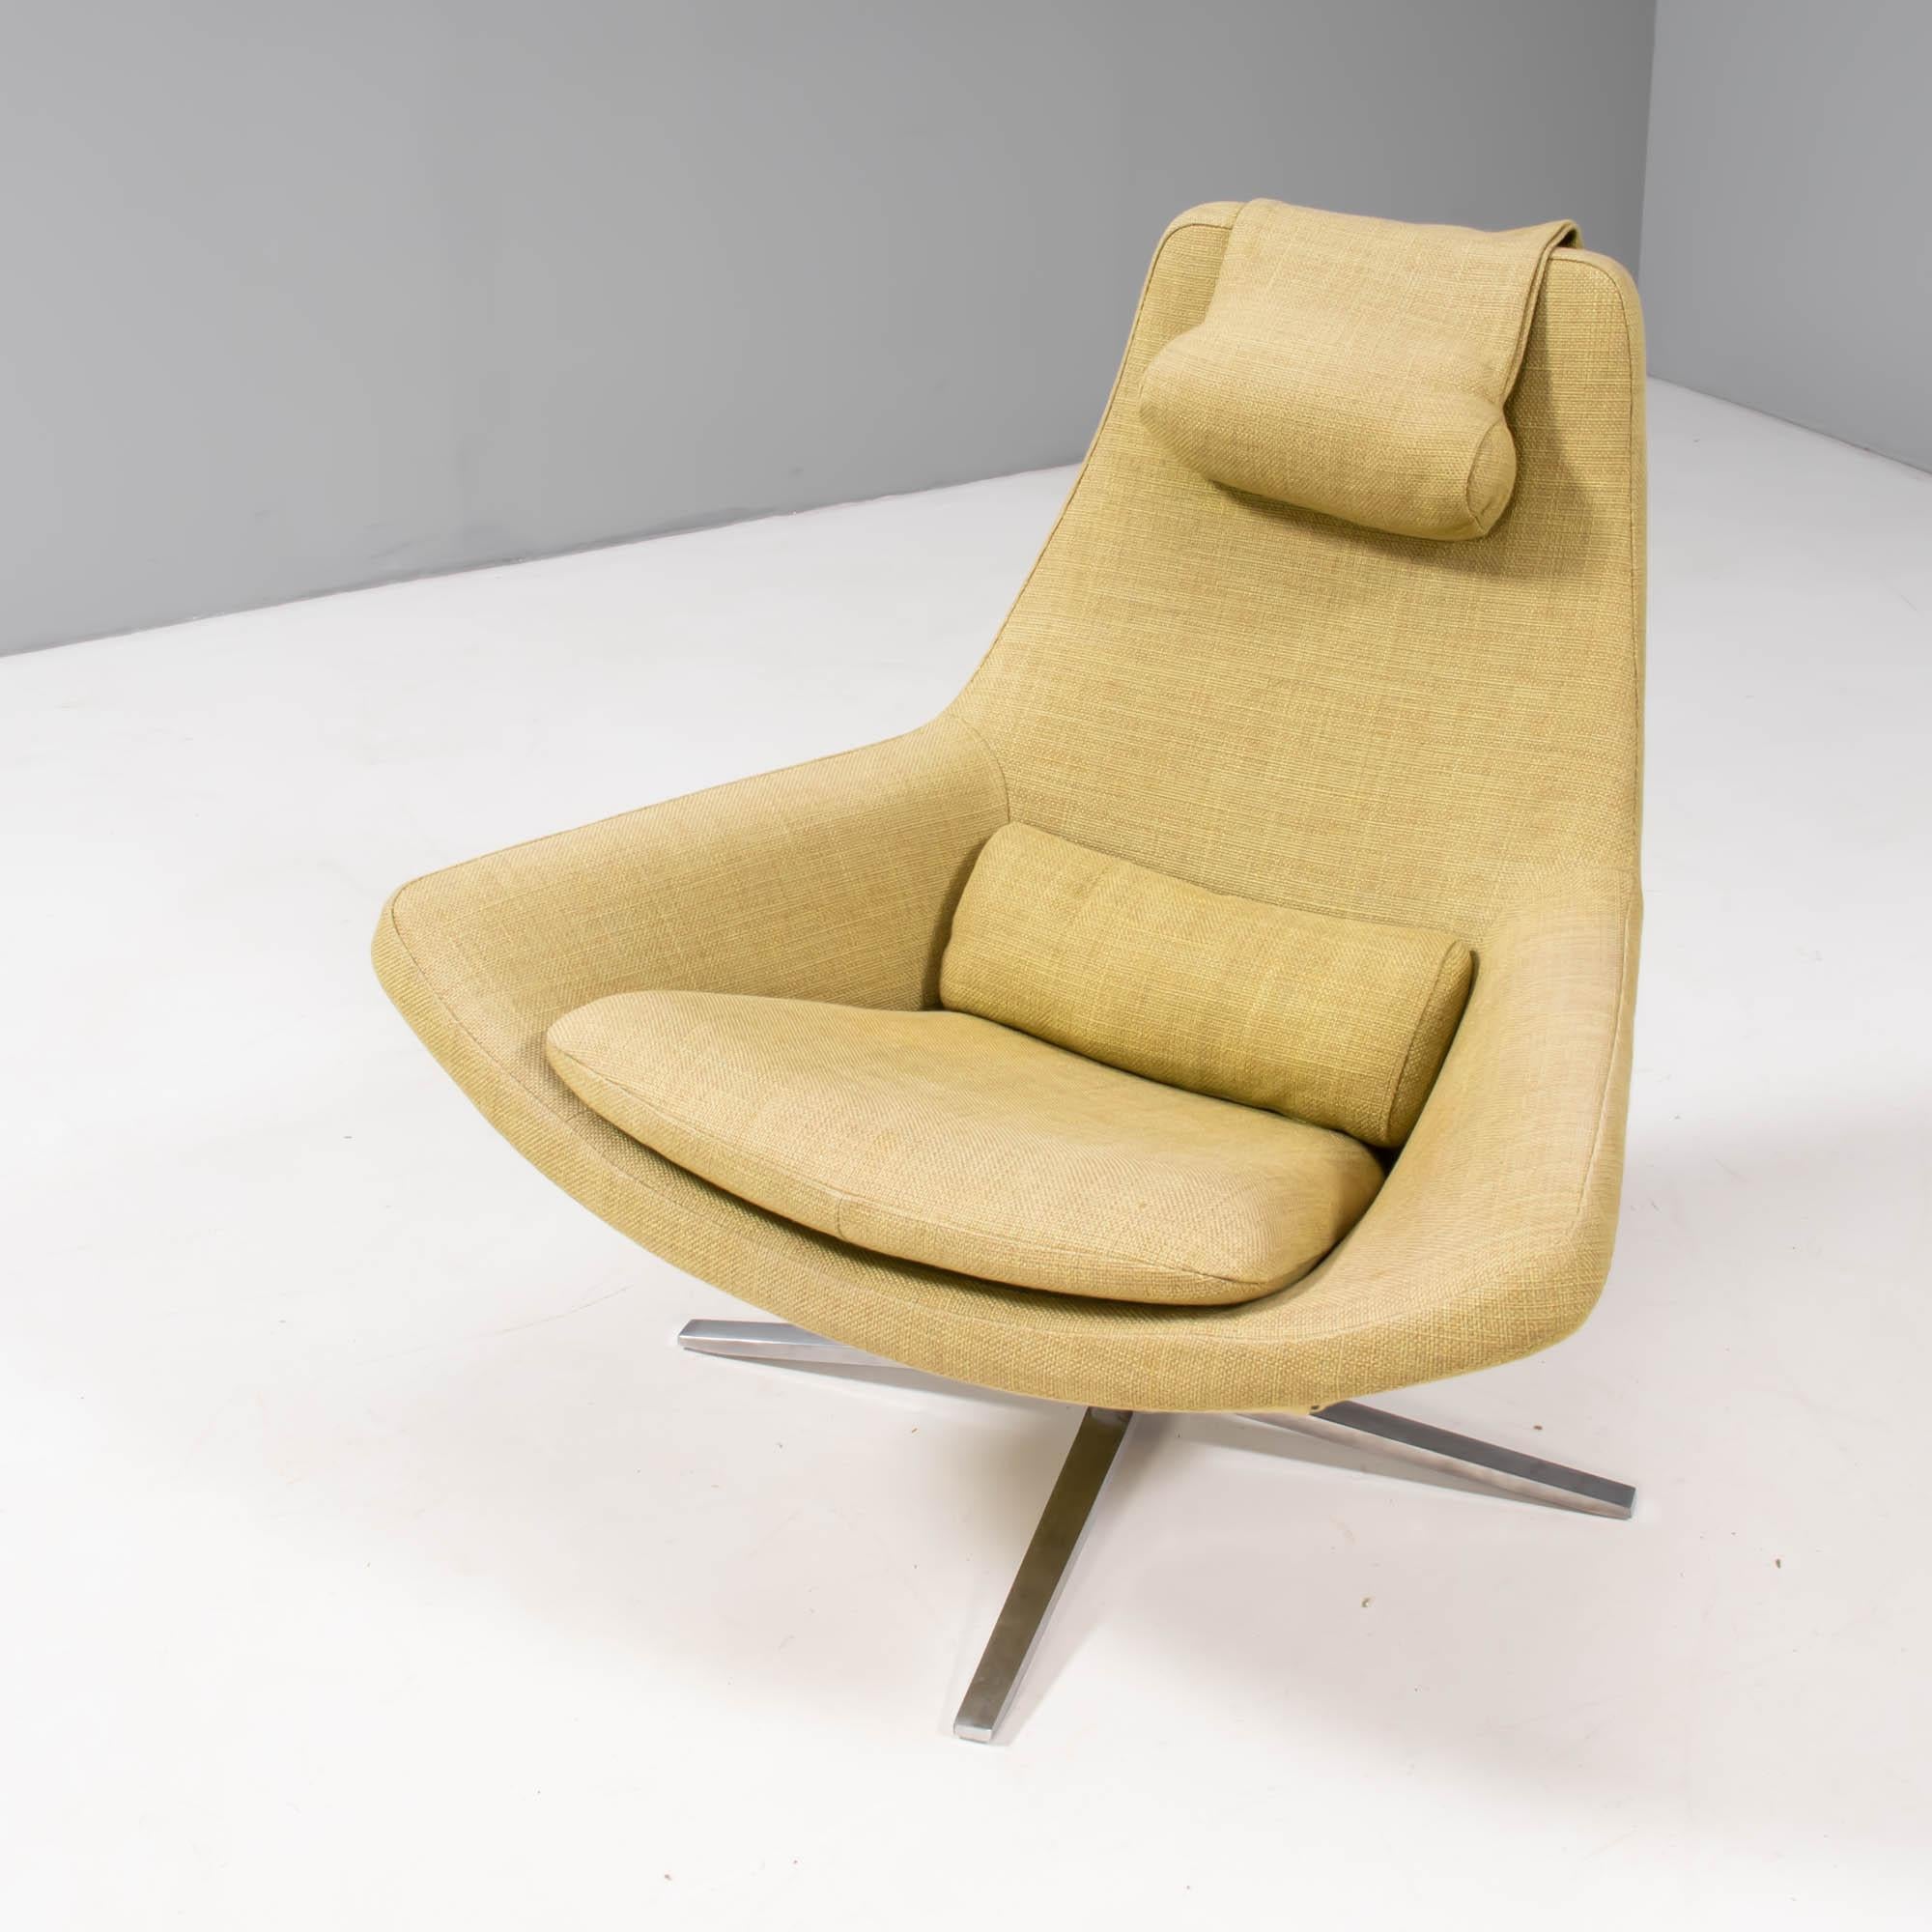 Designed by Jeffrey Bernett for B&B Italia in 2003, the Metropolitan ME100/1 armchair is a larger version of the original Metropolitan chair.

Upholstered in the original light green fabric, the armchair features a seat that flows uninterruptedly